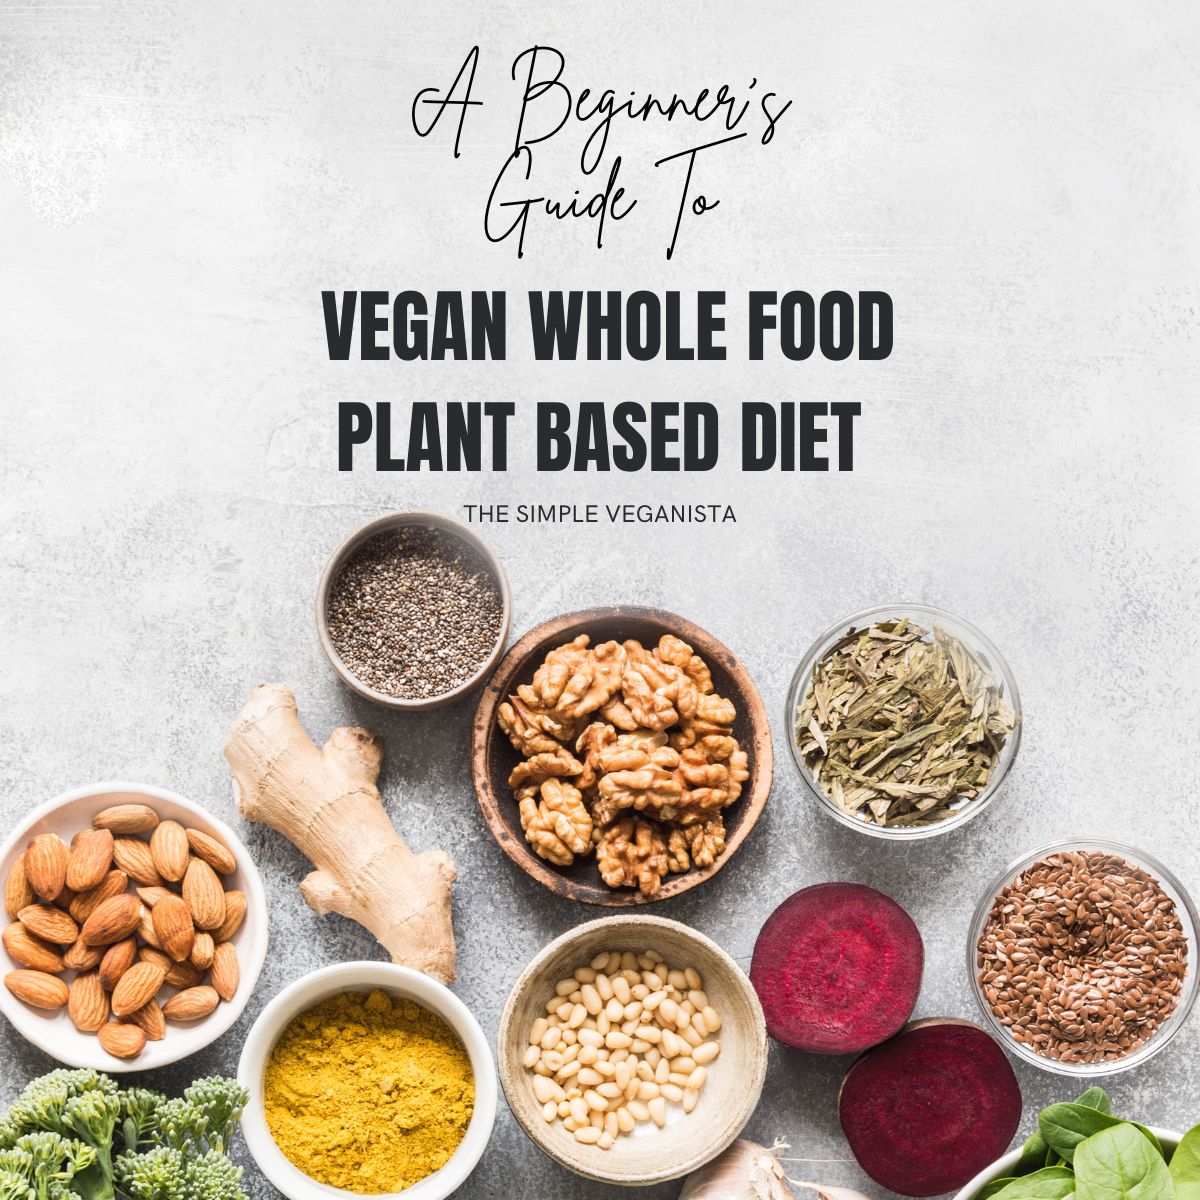 A Beginner’s Guide to a Plant Based Diet (V + WFPB)